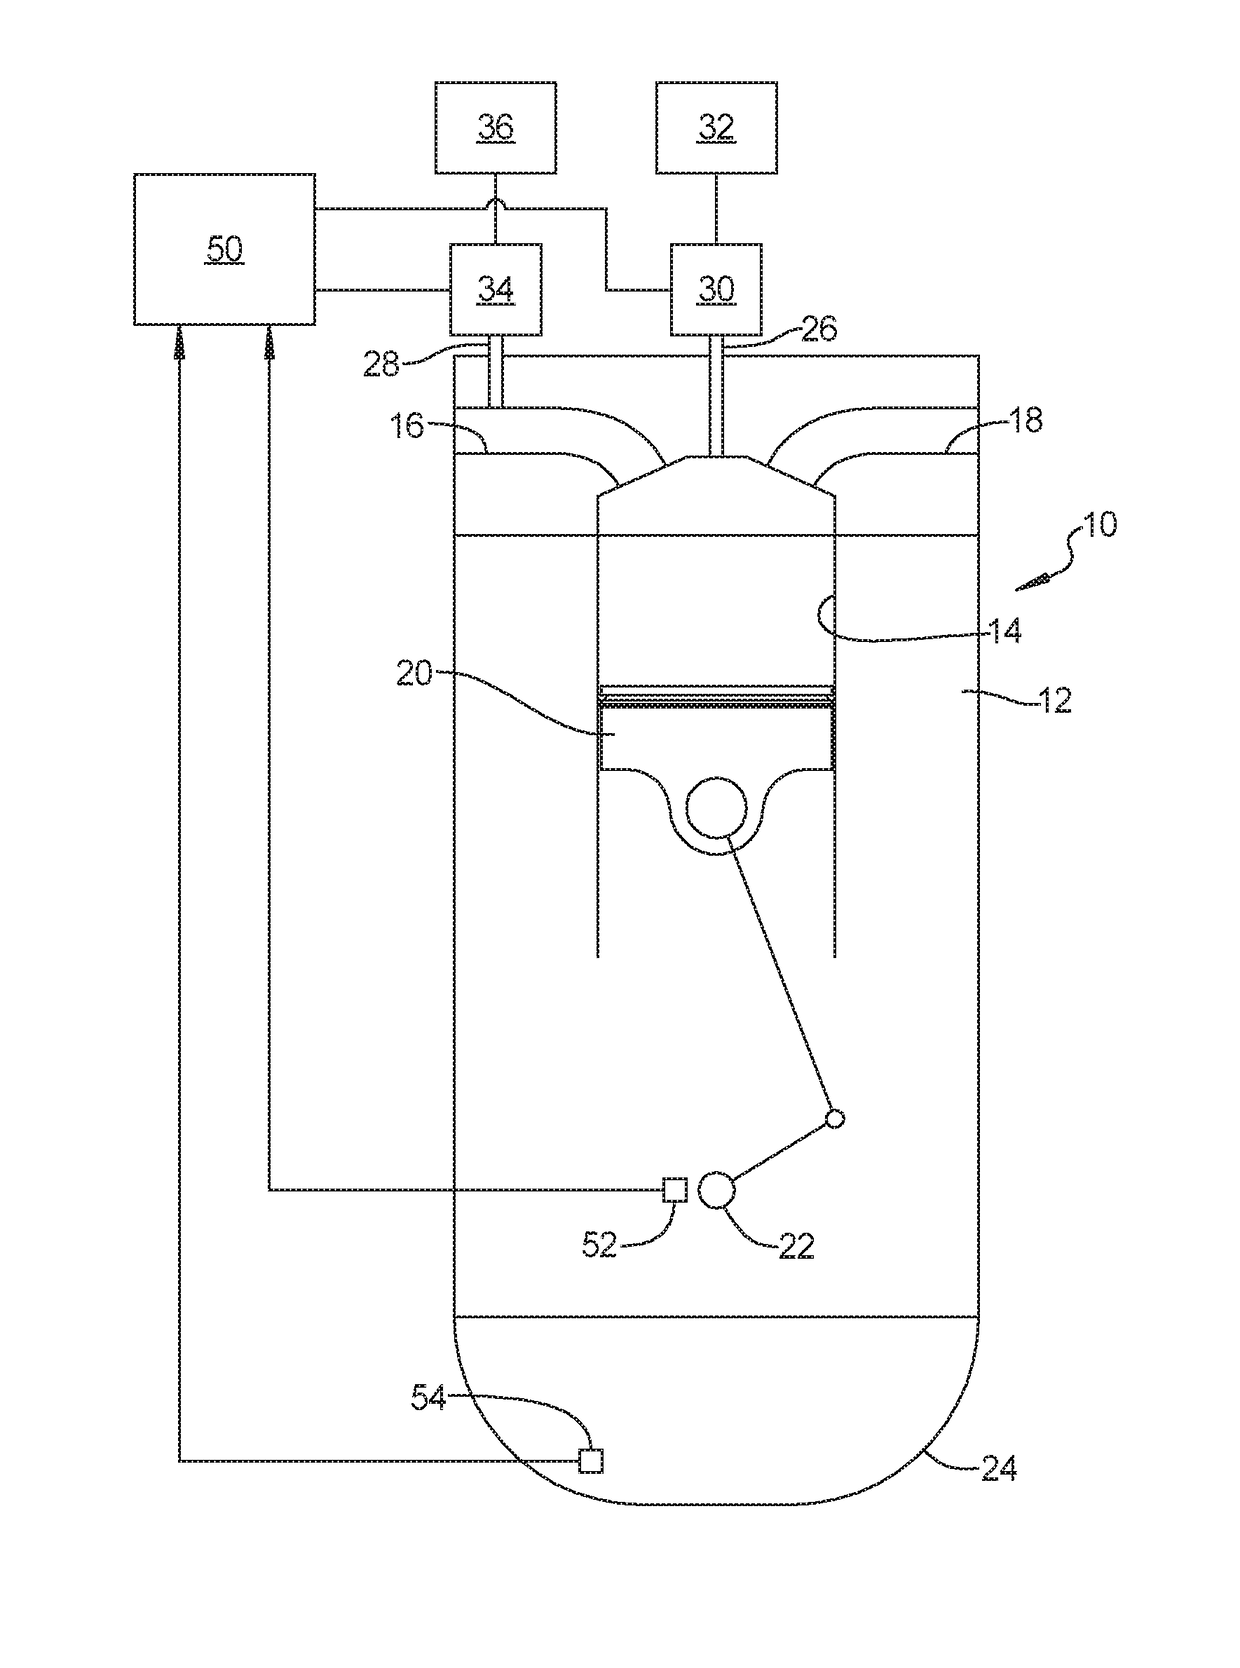 Engine with direct injection and port fuel injection adjustment based upon engine oil parameters